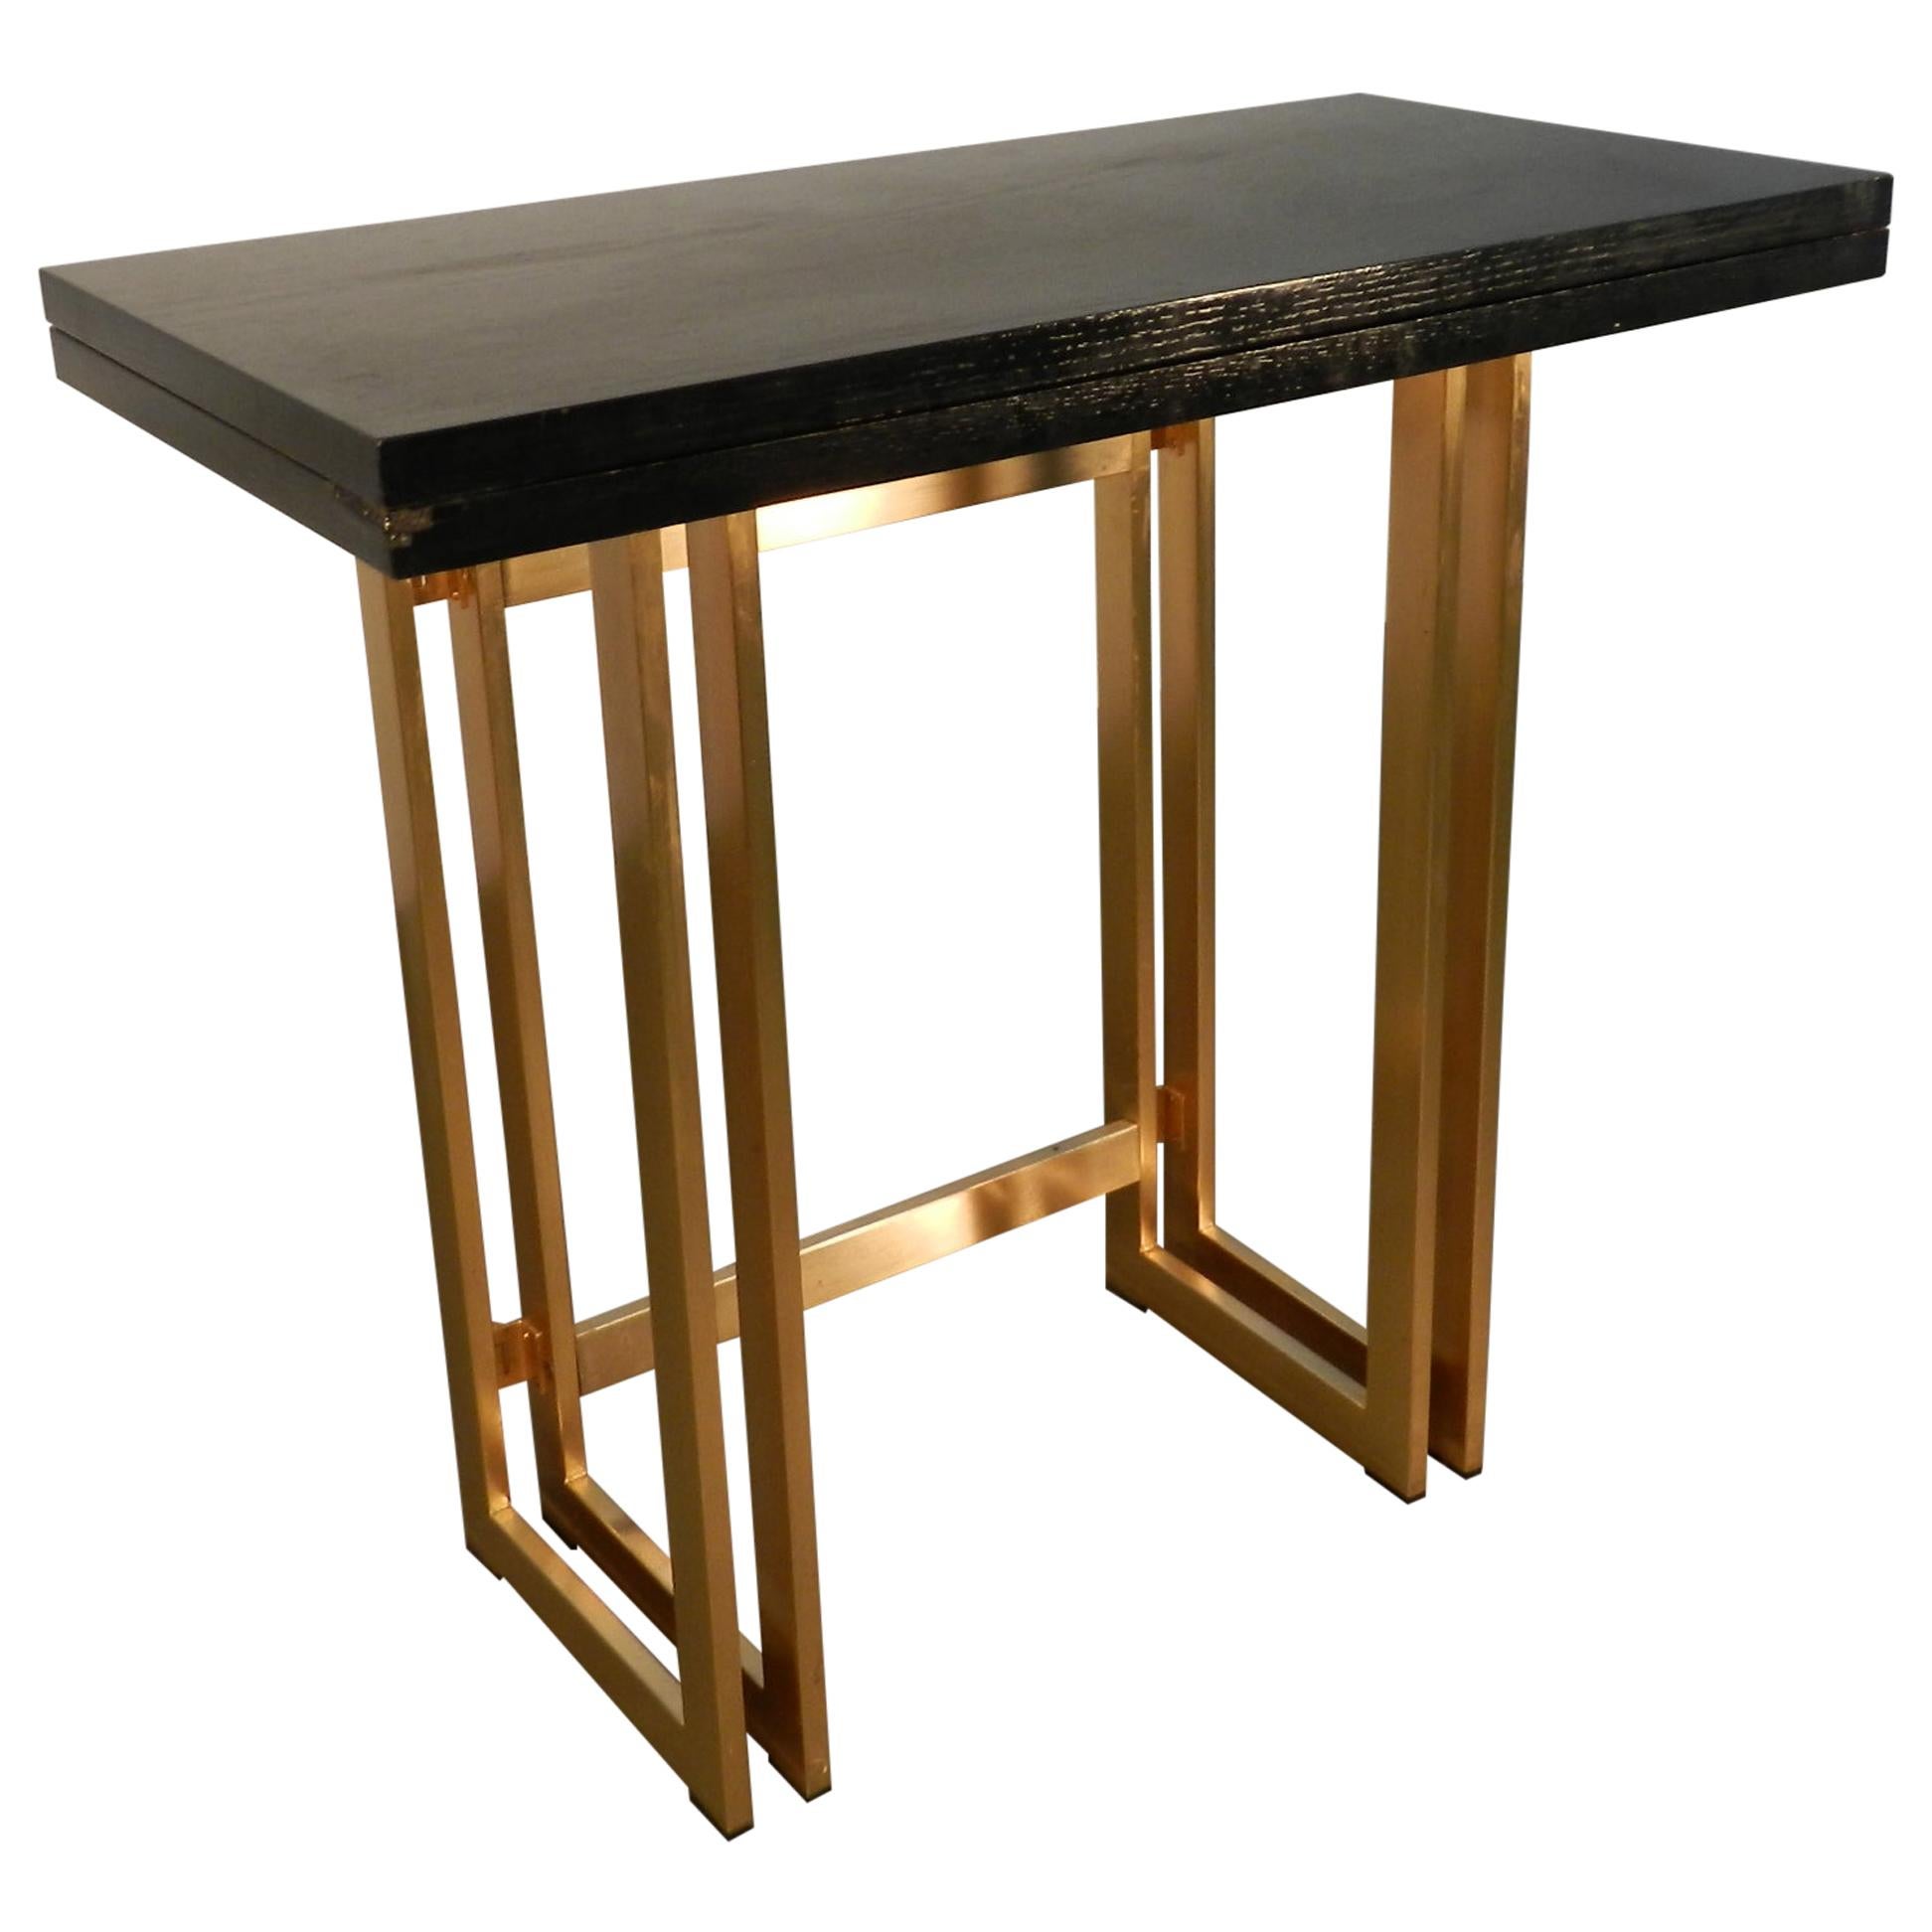 Artelano, Italian Midcentury steel and stained oak Extending Console Table, 1970 For Sale